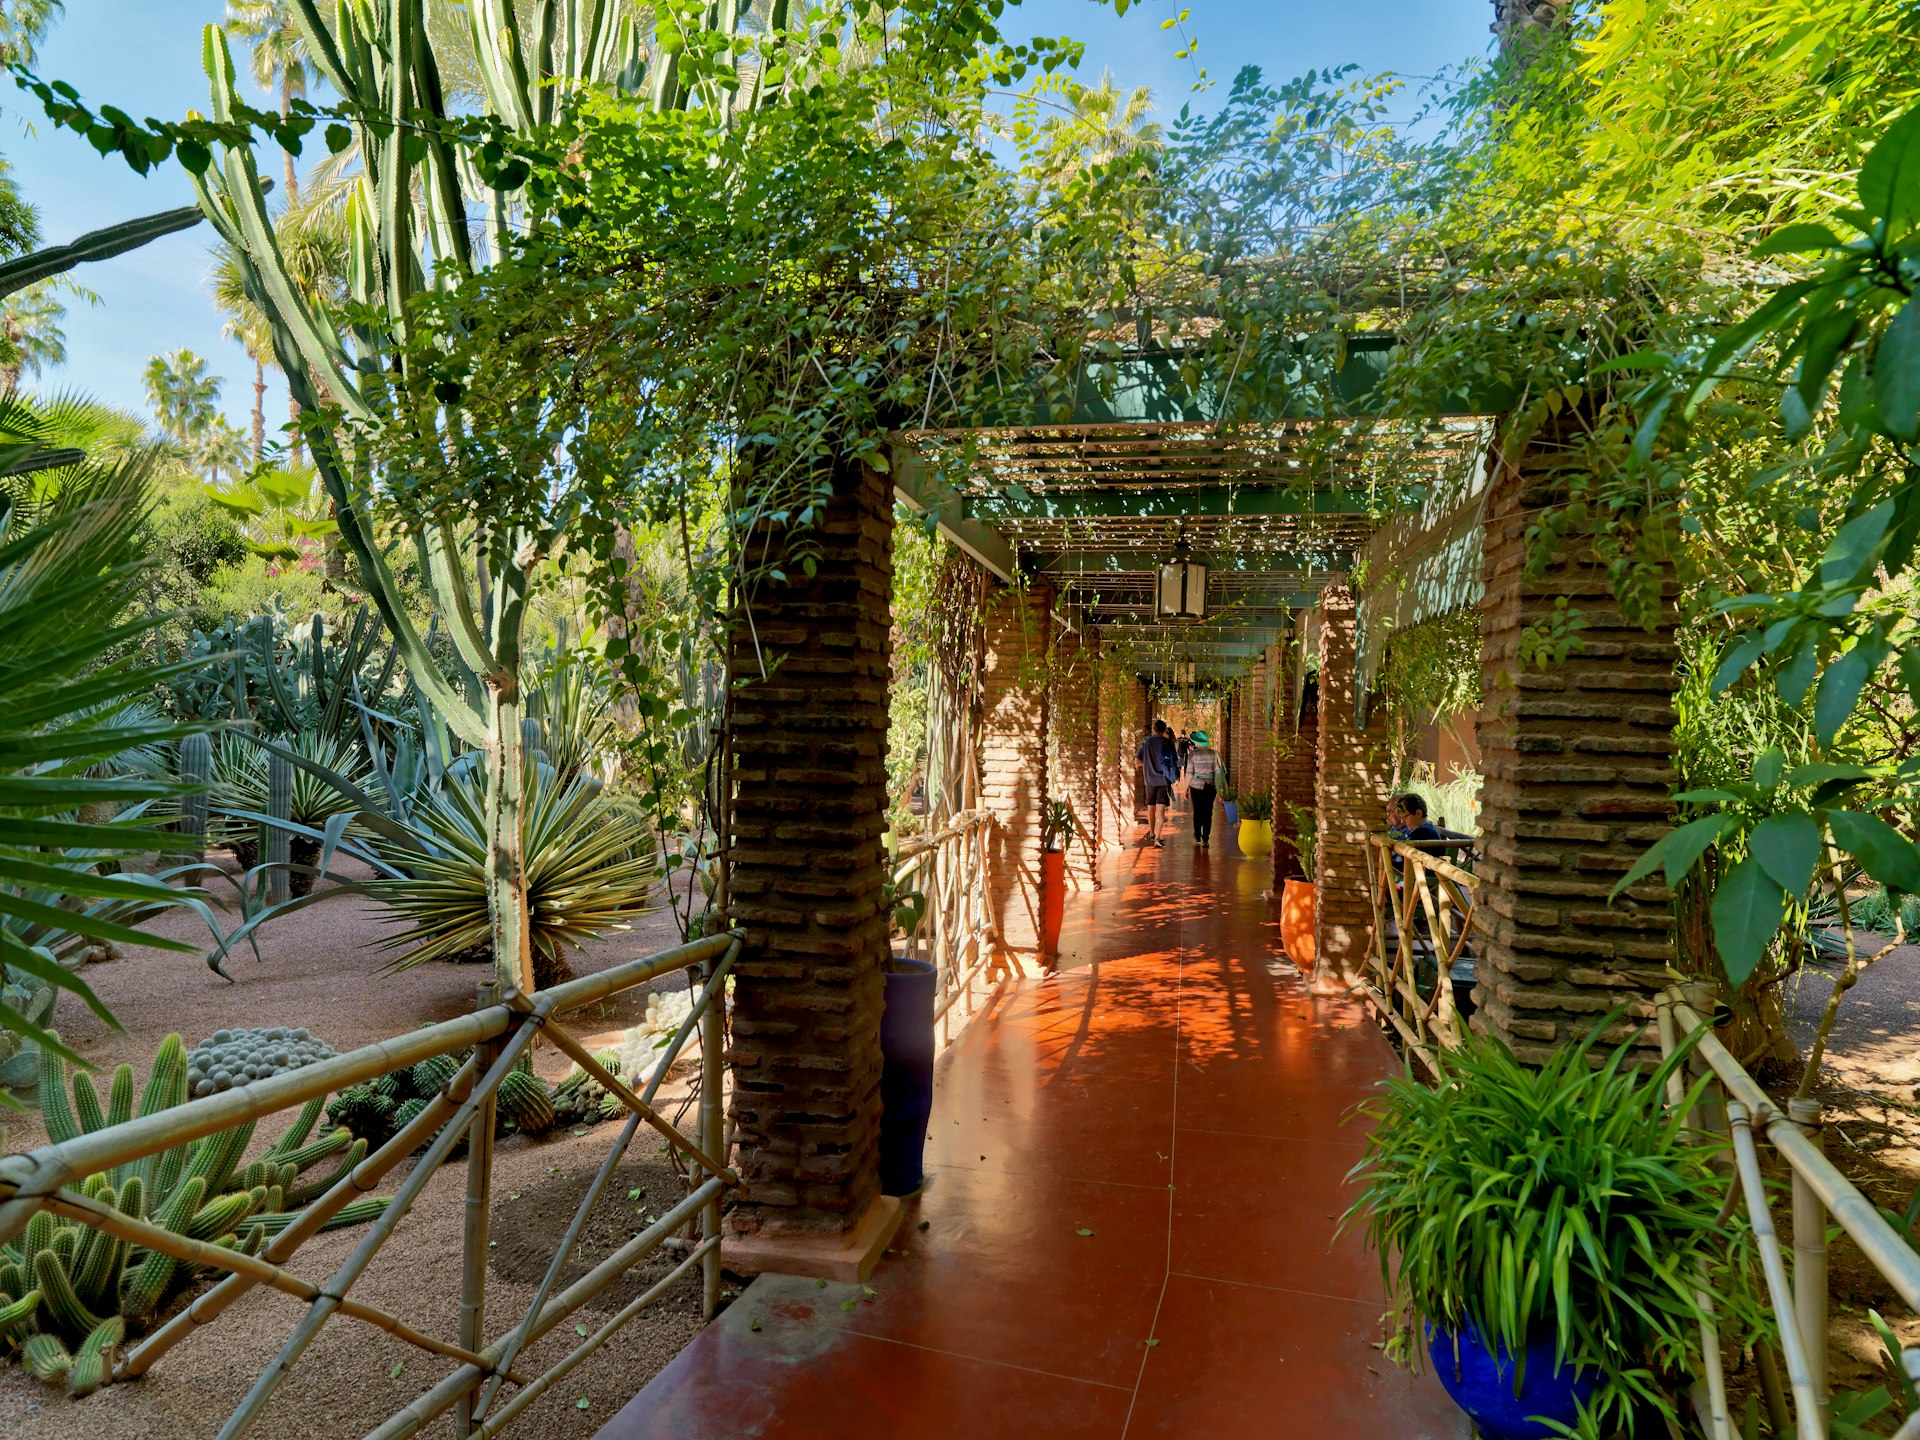 The Jardin Majorelle gardens in Marrakech is one of the most famous place in Morocco. Feb 09, 2014